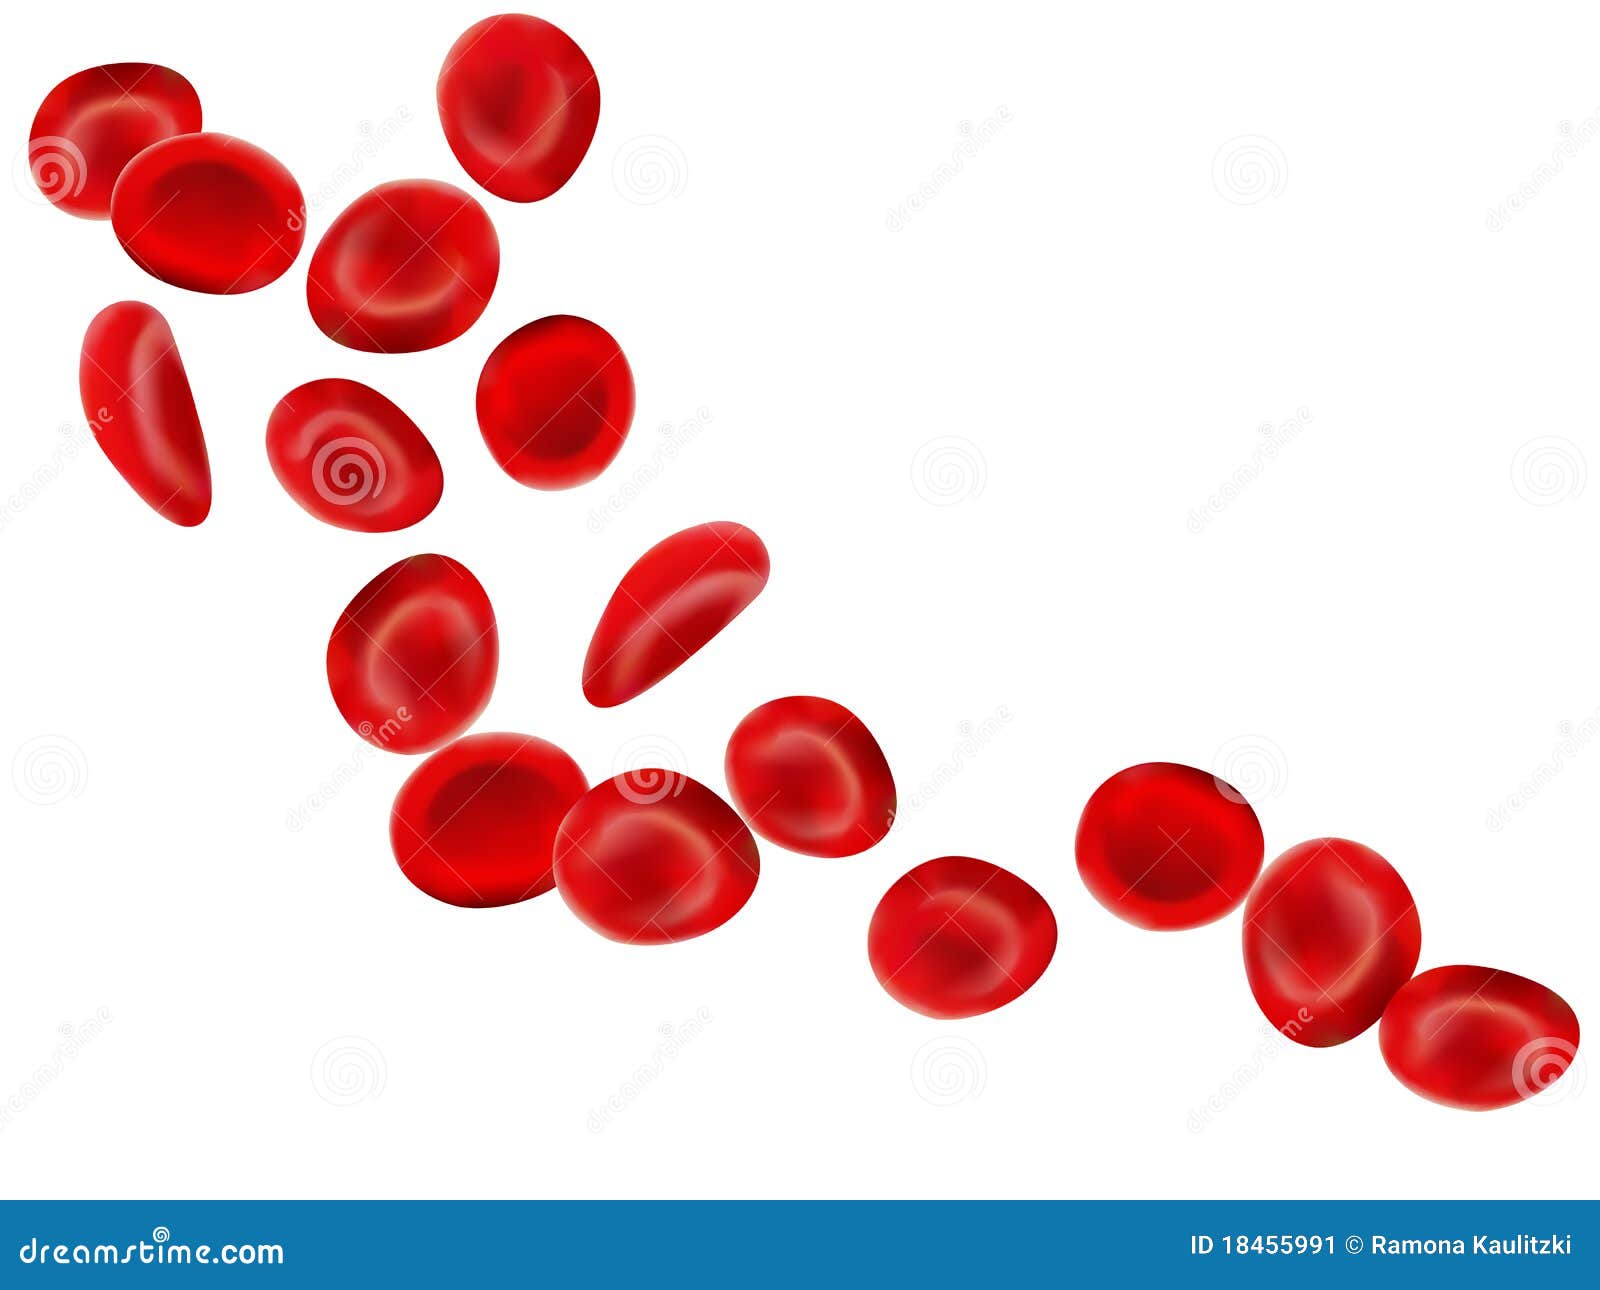 free clipart blood cells - photo #23